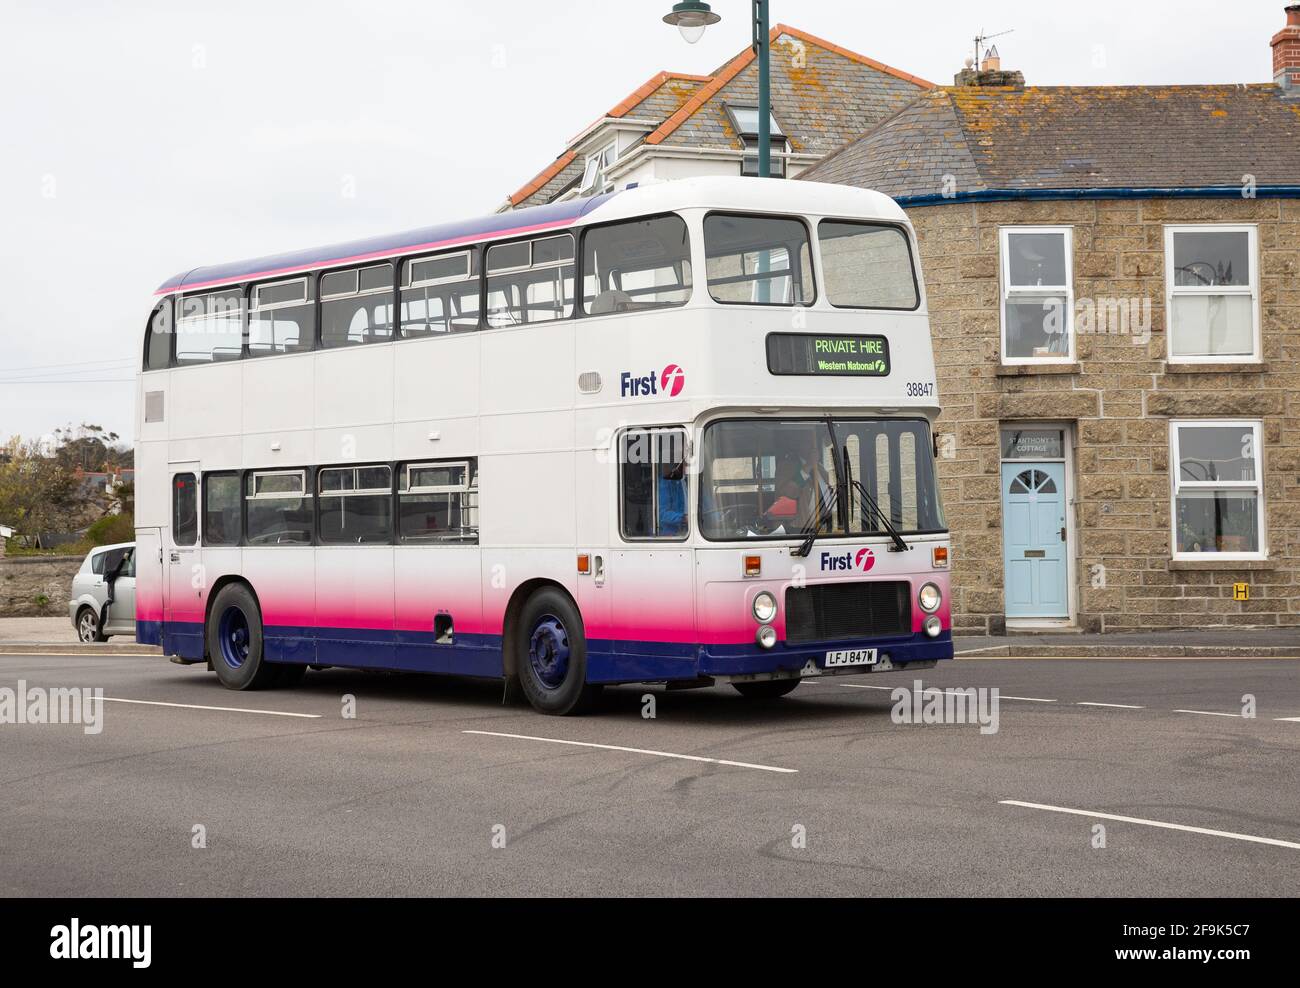 First Double decker bus driving through Penzance, Cornwall, UK Stock Photo